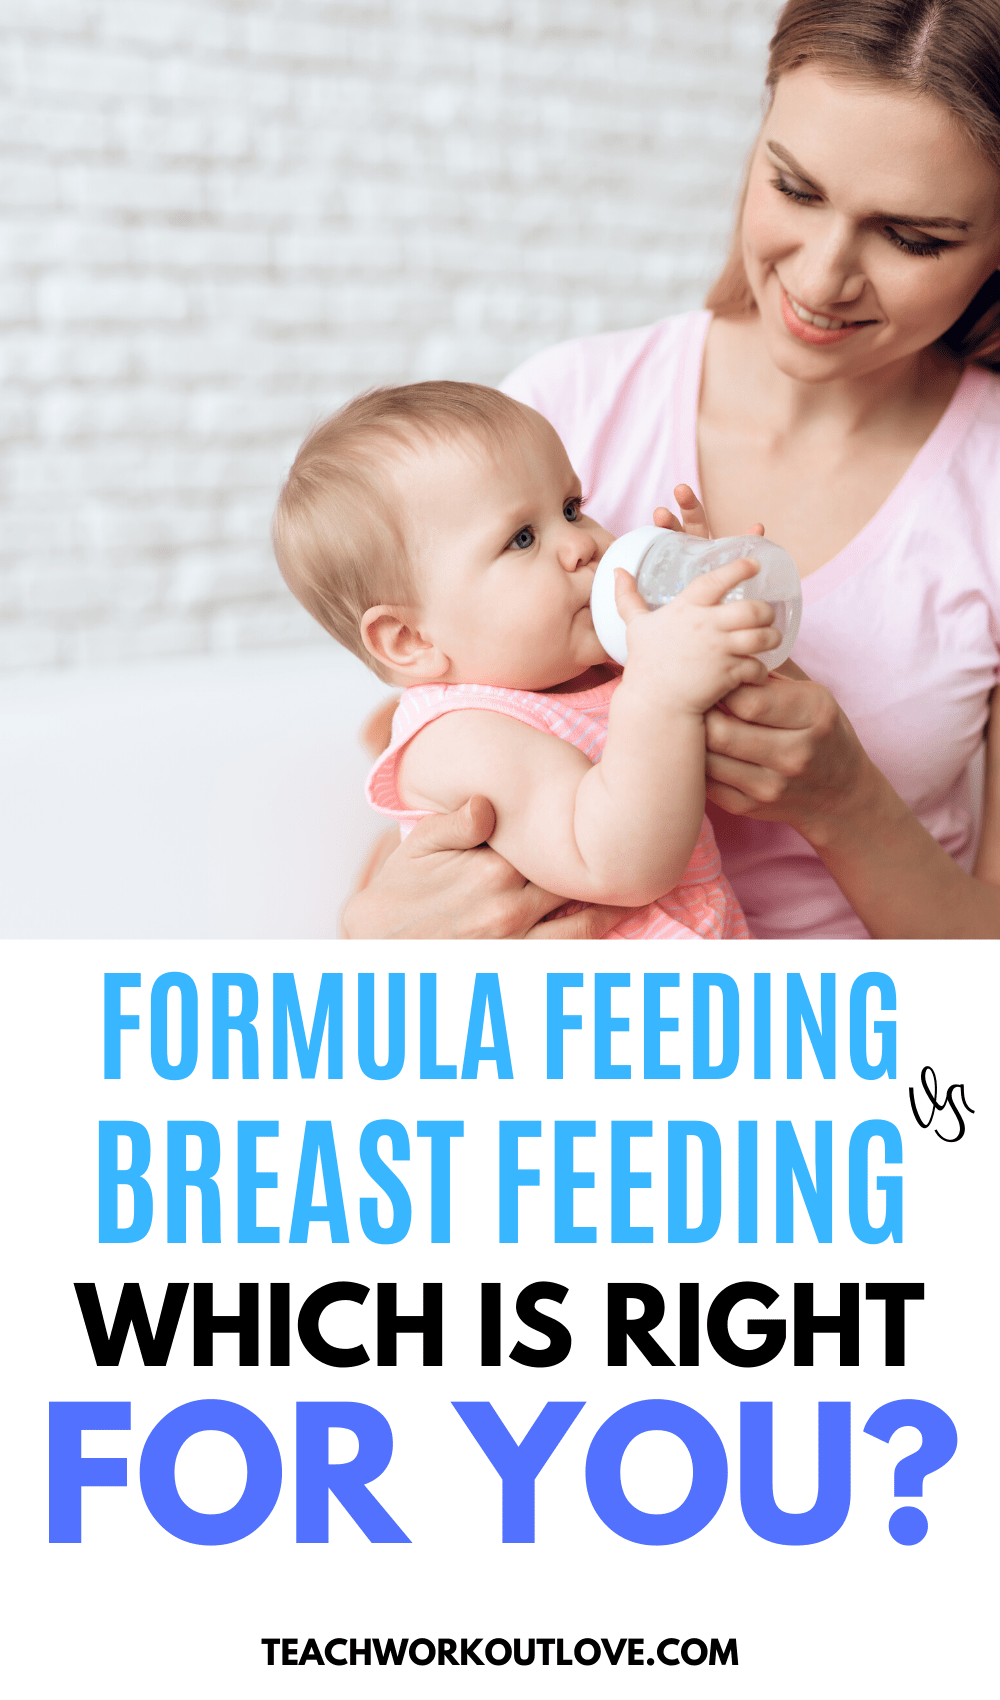 When you're a new mom, there is much debate formula feeding vs. breastfeeding. Read on to find out the pros and cons of formula feeding vs. breastfeeding.